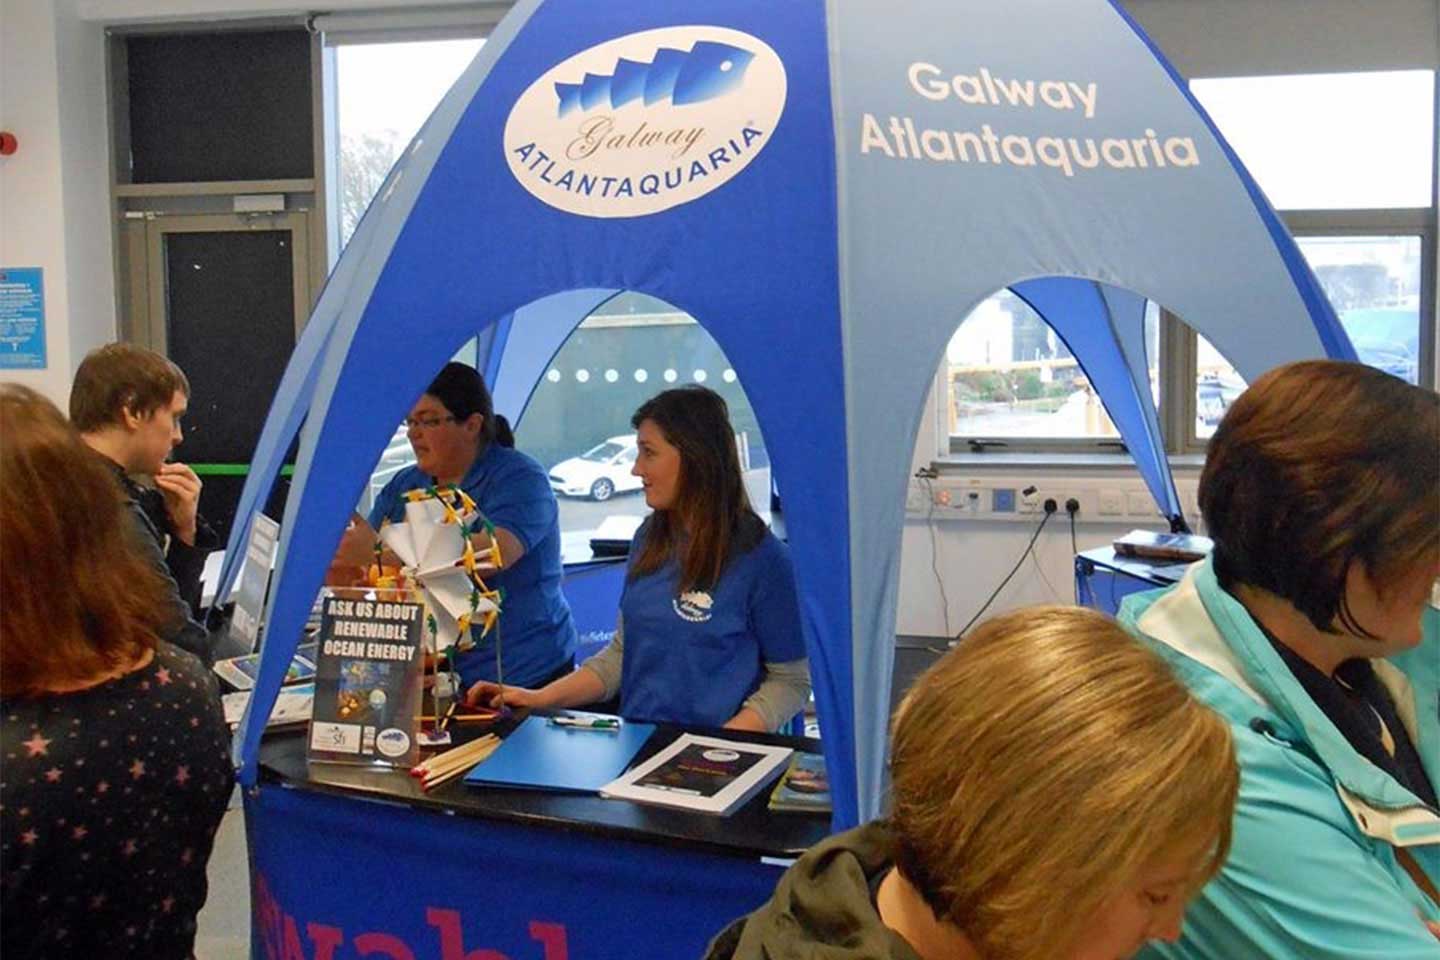 Pop Up Kiosk for Galway Atlantaquaria